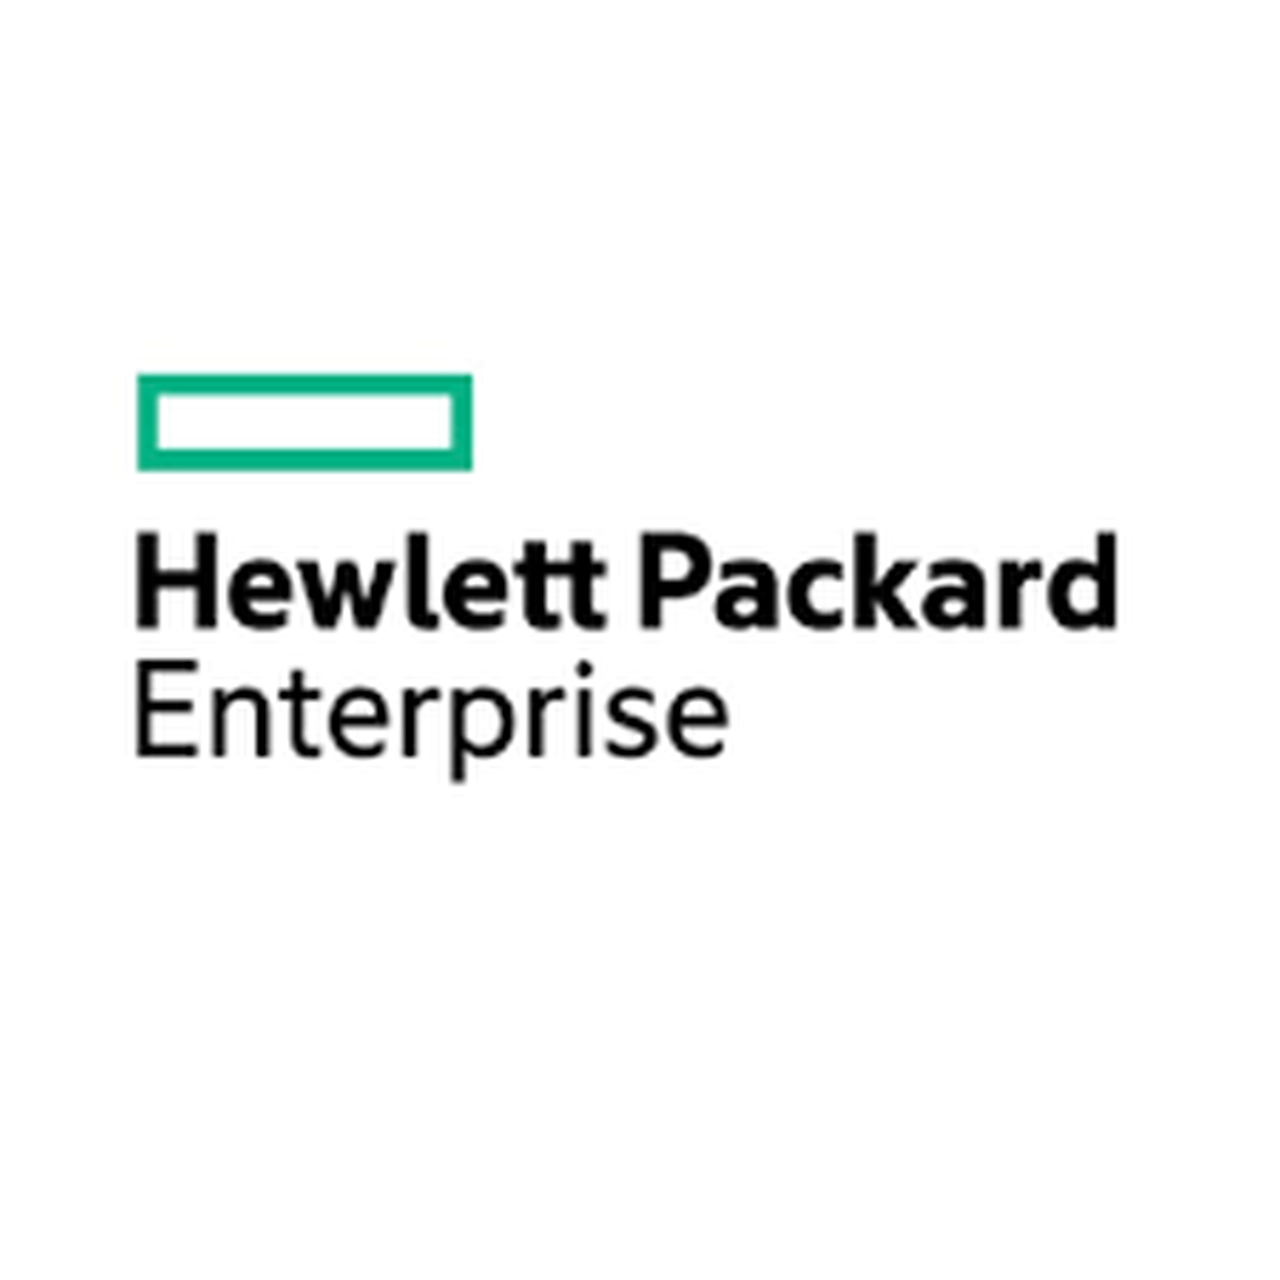 HPE 1 Year Post Warranty Foundation Care, Next Business Day wCDMR BL465c G6 Service